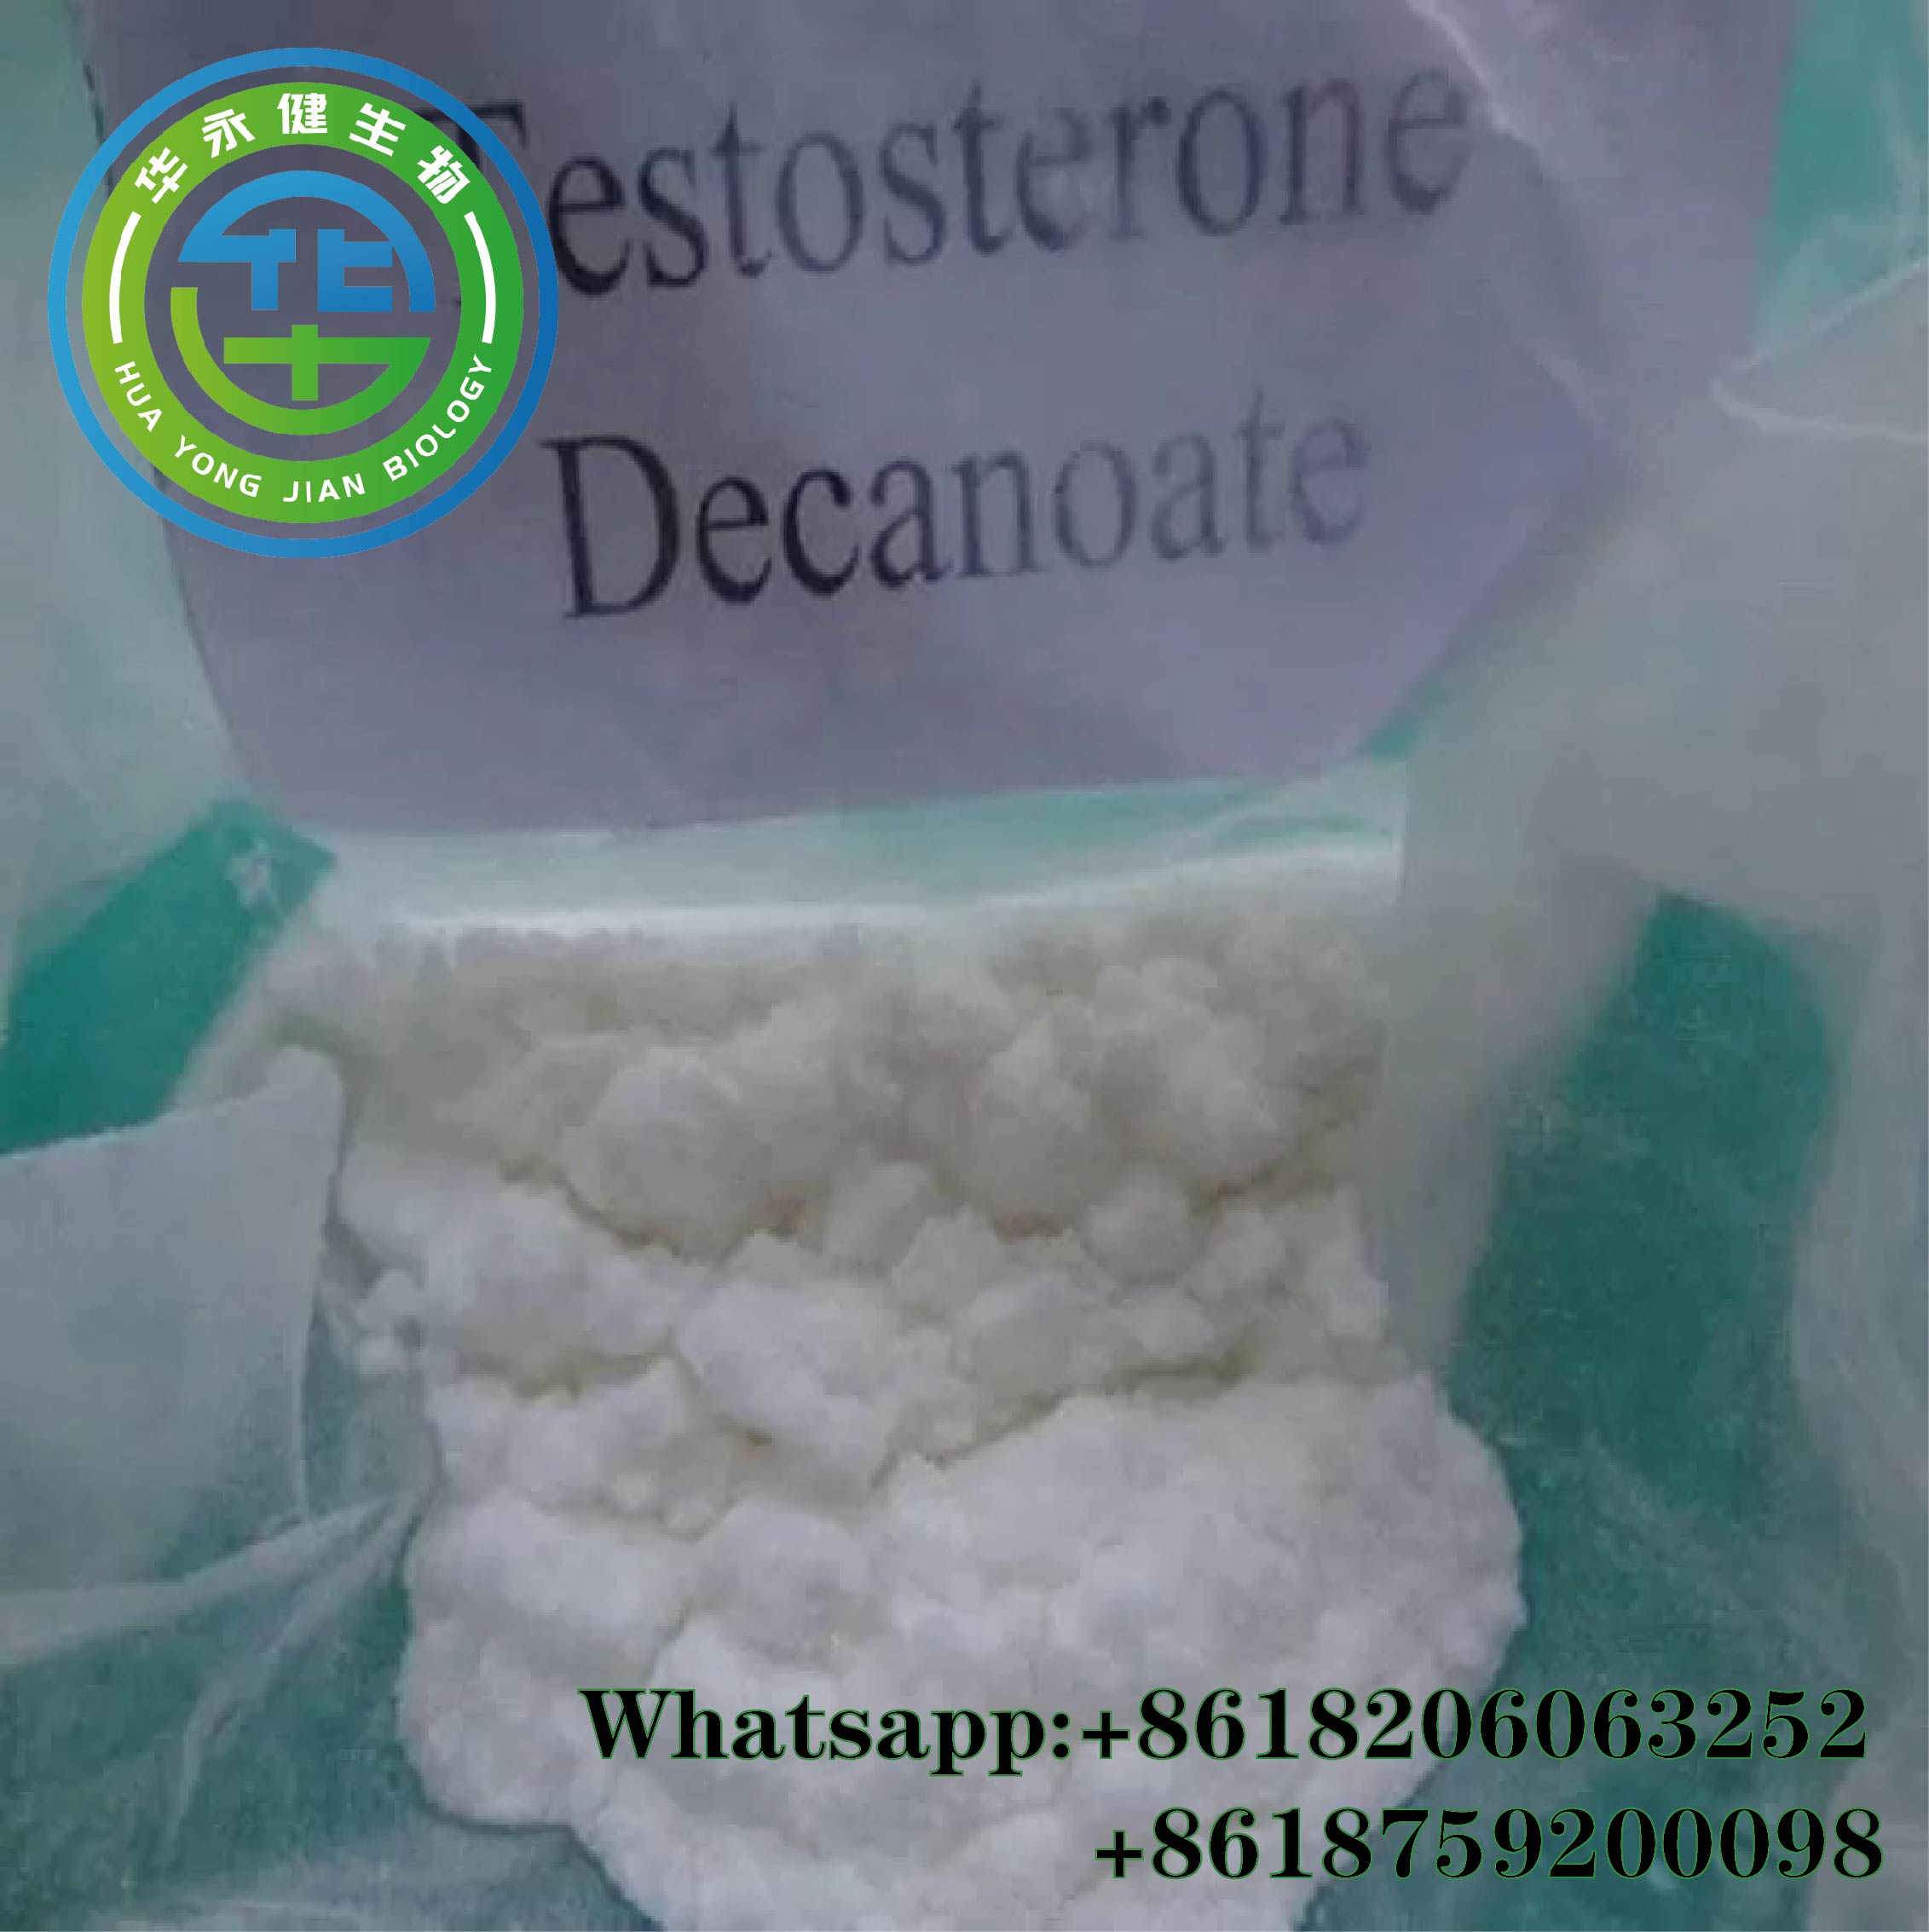 Testosterone Decanoate/Test Deca Steroid Hormone Powder for Gaining Strength CAS:5721-91-5